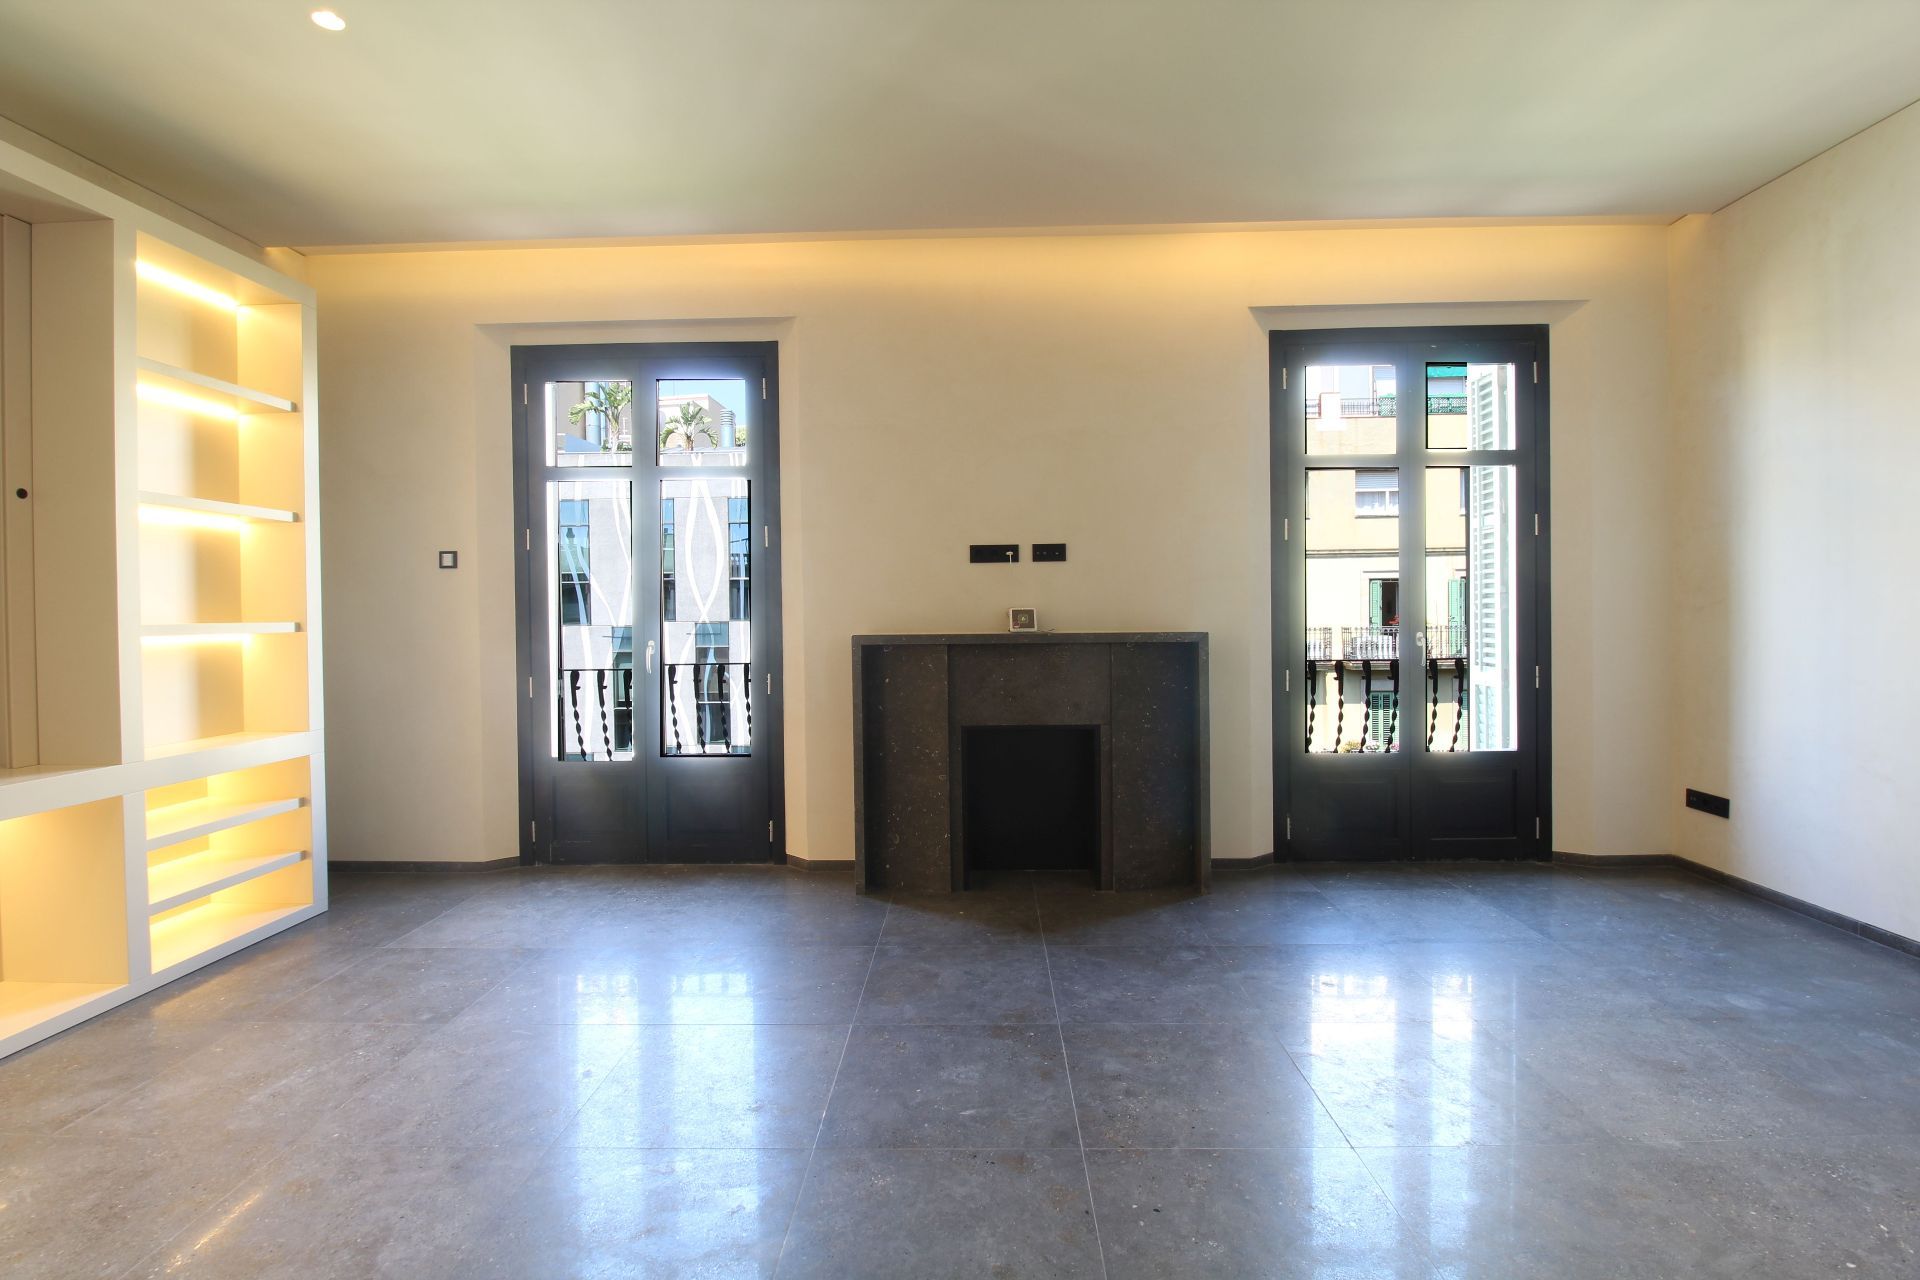 Flat in Barcelona, Eixample, for sale